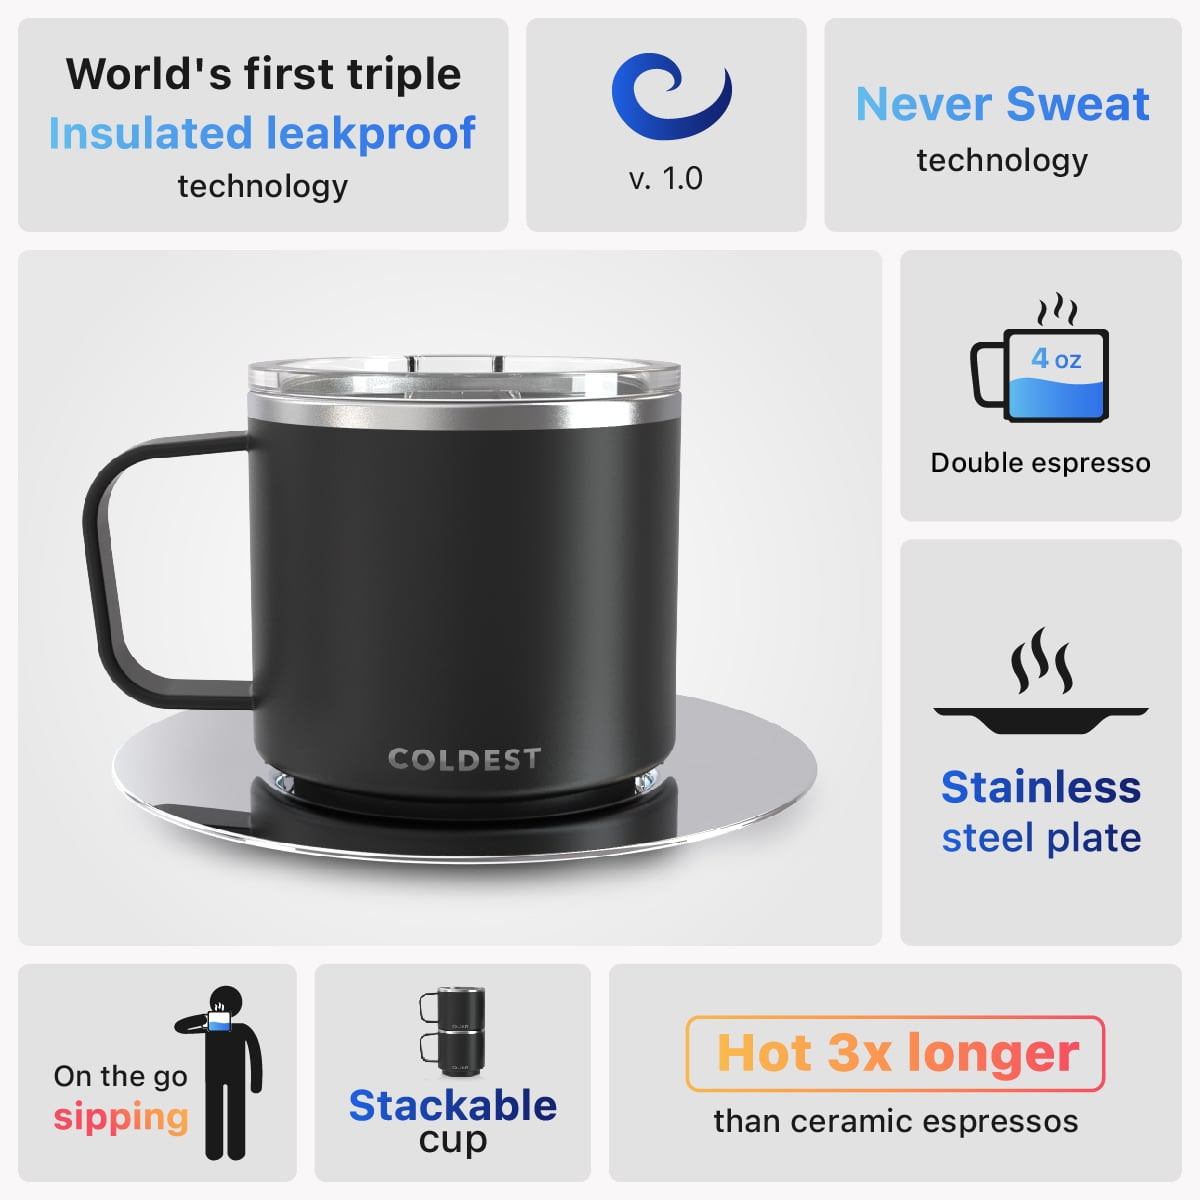 The Coldest Coffee Mug - Stainless Steel Super Insulated Travel Mug for Hot  & Cold Drinks, Best for Tea, Lattes, Cappuccino Coffee Cup( Stealth Black  24 Oz) 